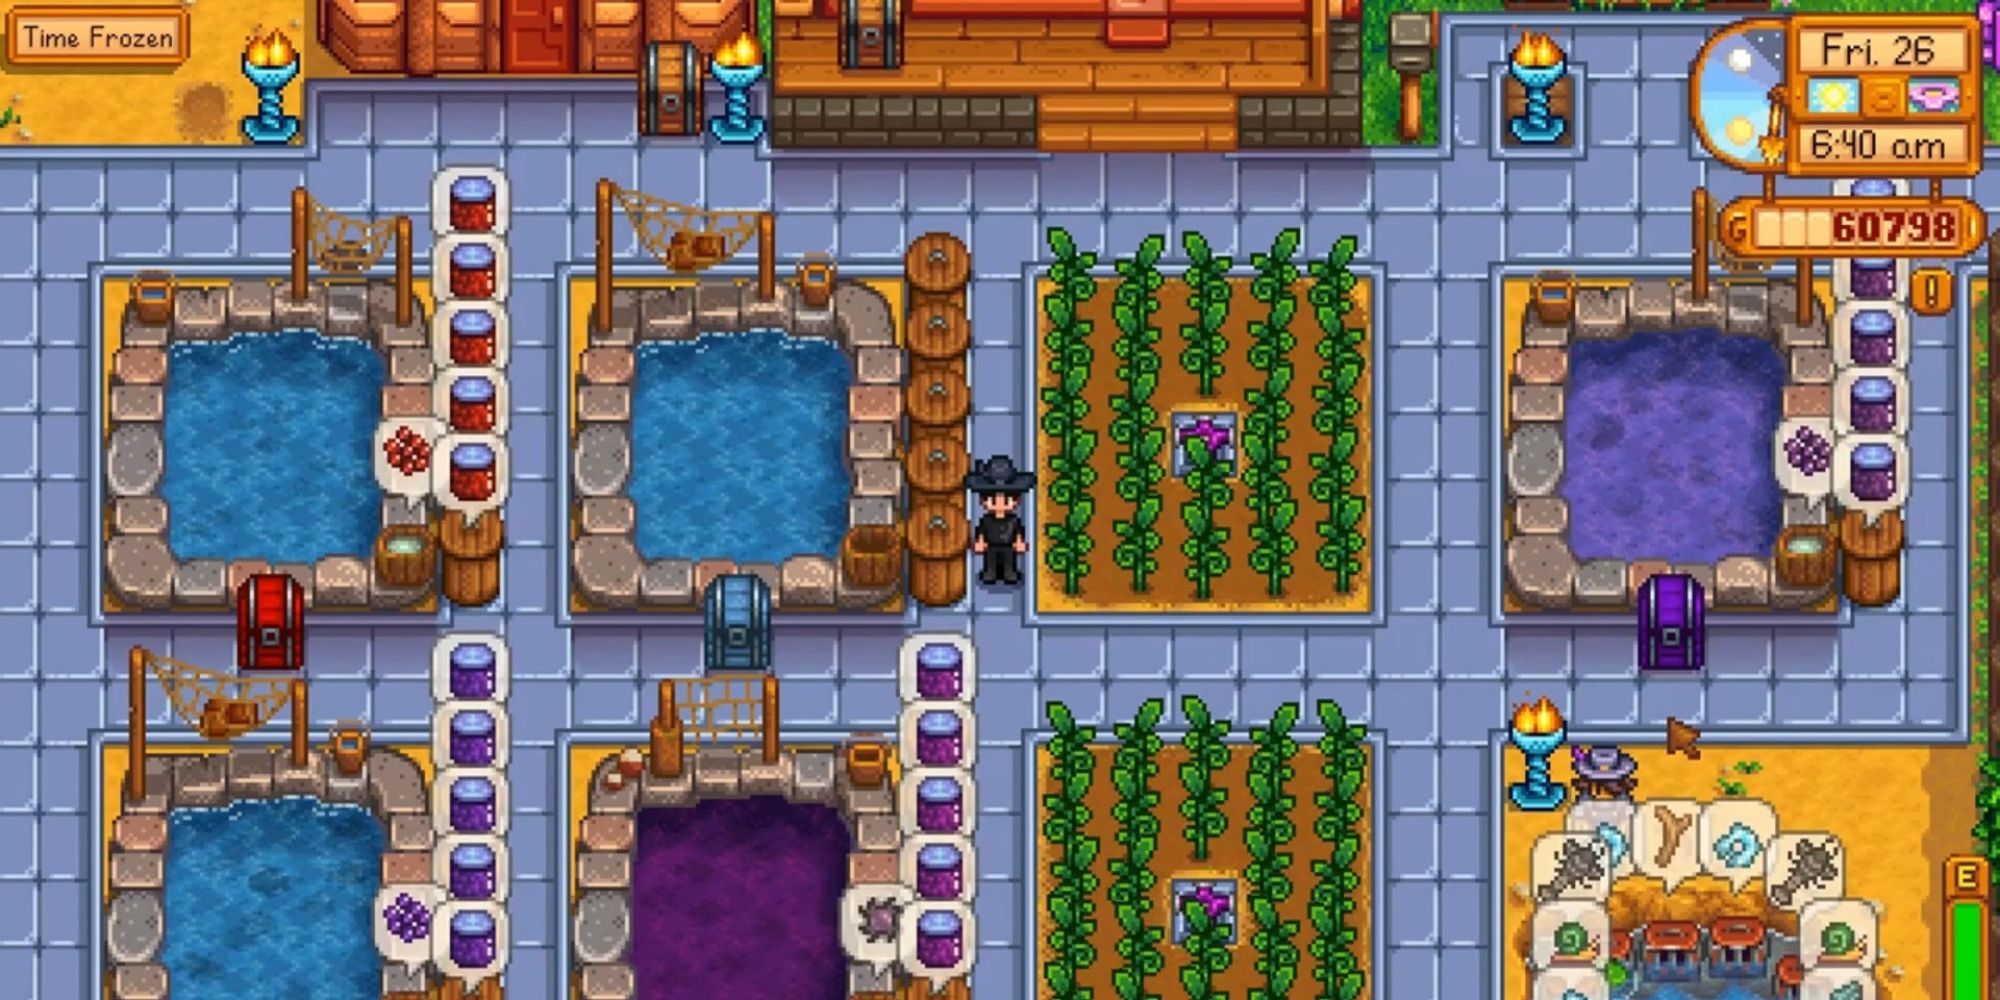 Stardew Valley: The player stands amidst several Fish Ponds, preserve jars, and two plots of Ancient Fruit plants